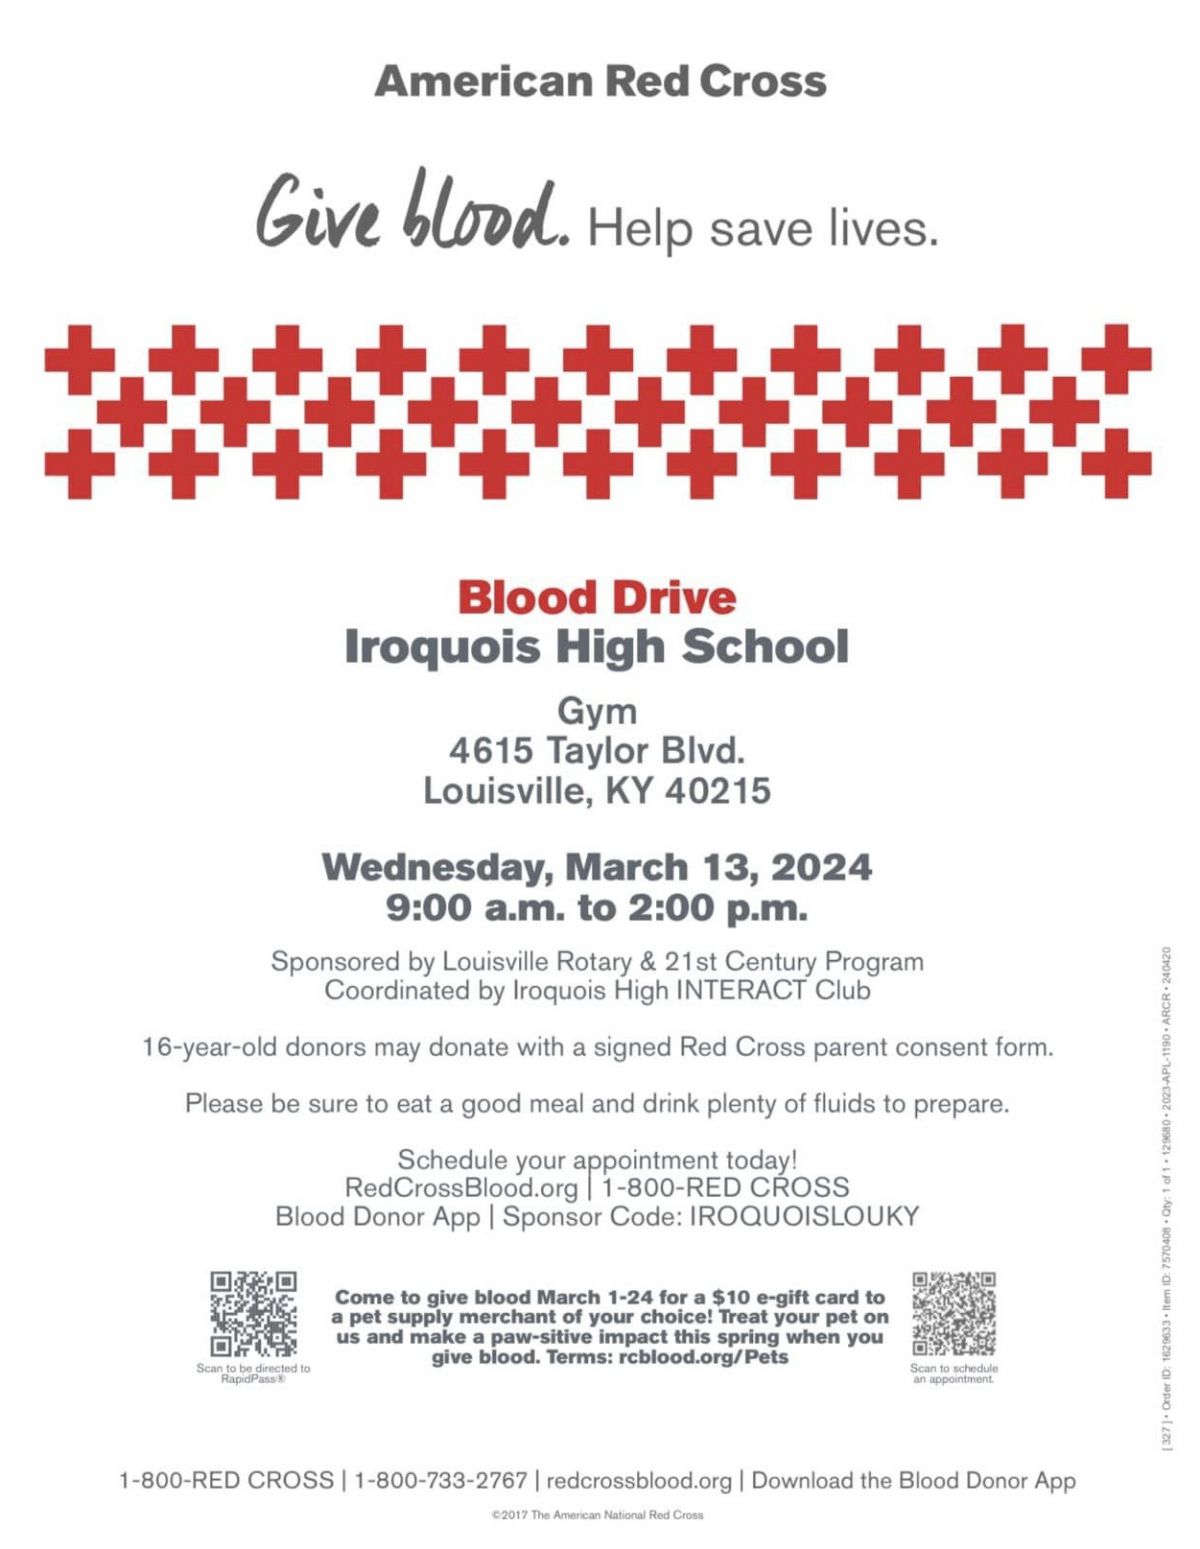 Rotary INTERACT Blood Drive at Iroquois High School 3.13.2024